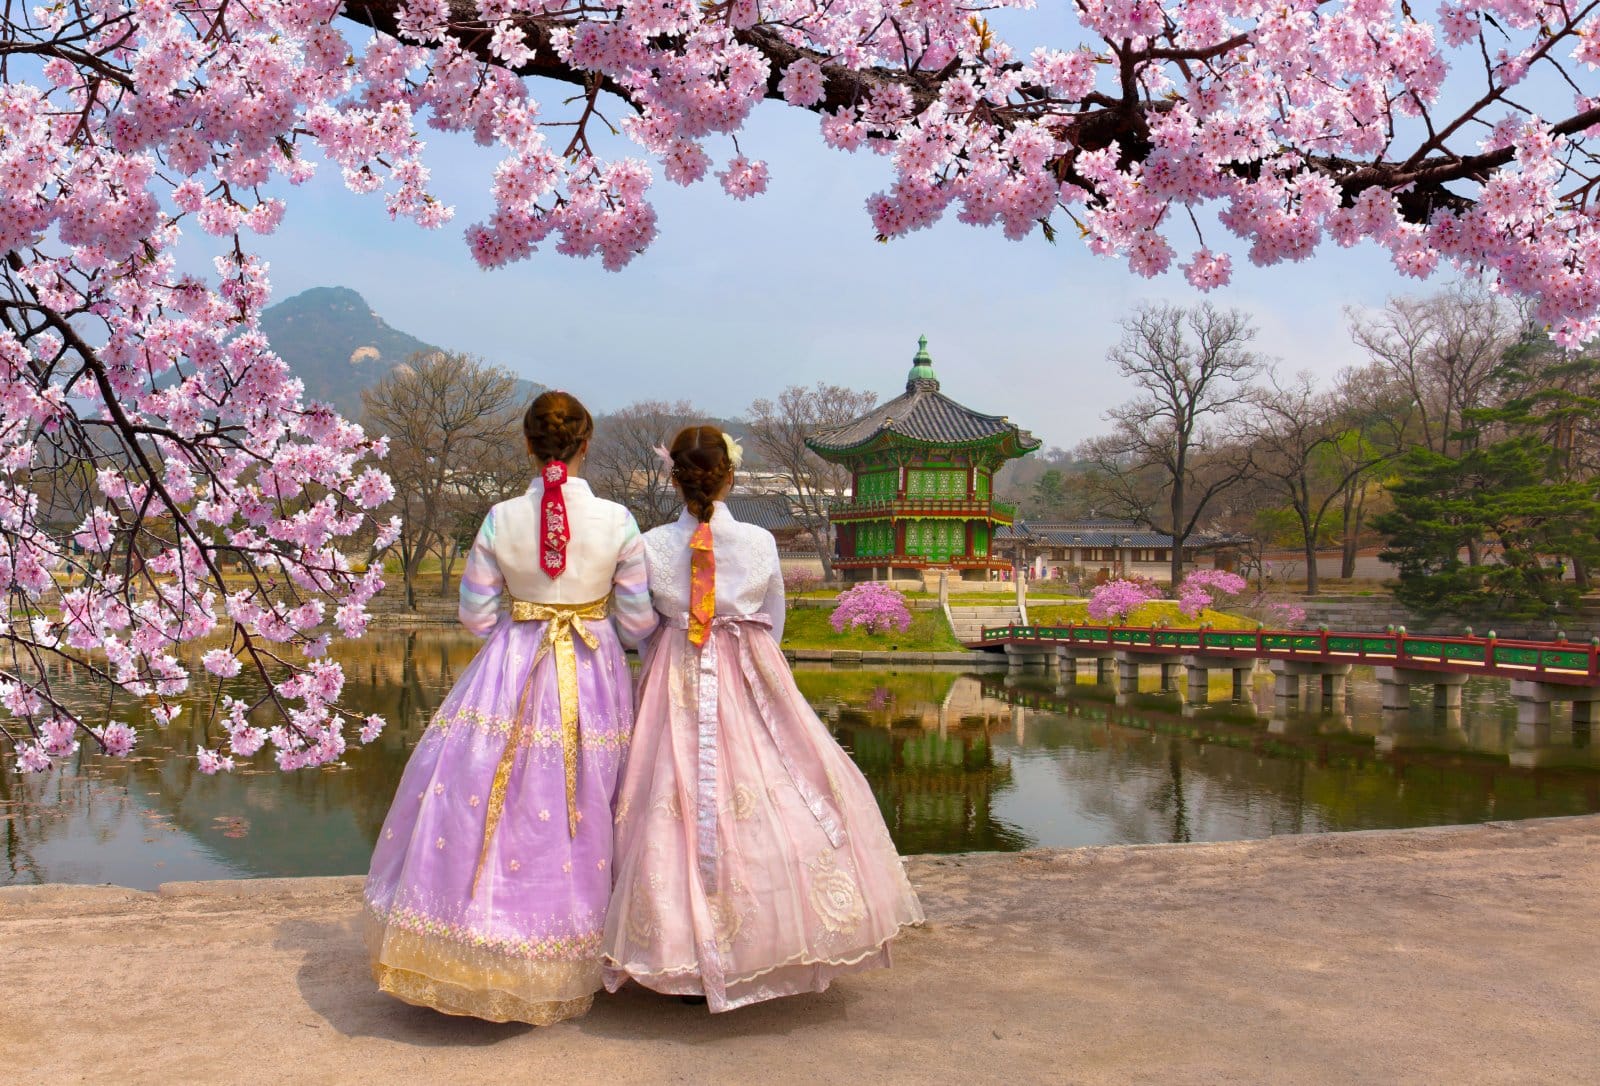 <p class="wp-caption-text">Image Credit: Shutterstock / Kampon</p>  <p>South Korea presents a dynamic mix of ancient culture and cutting-edge modernity. From the bustling streets of Seoul to the tranquil temples of Gyeongju, it’s a place where tradition and the future live side by side.</p>